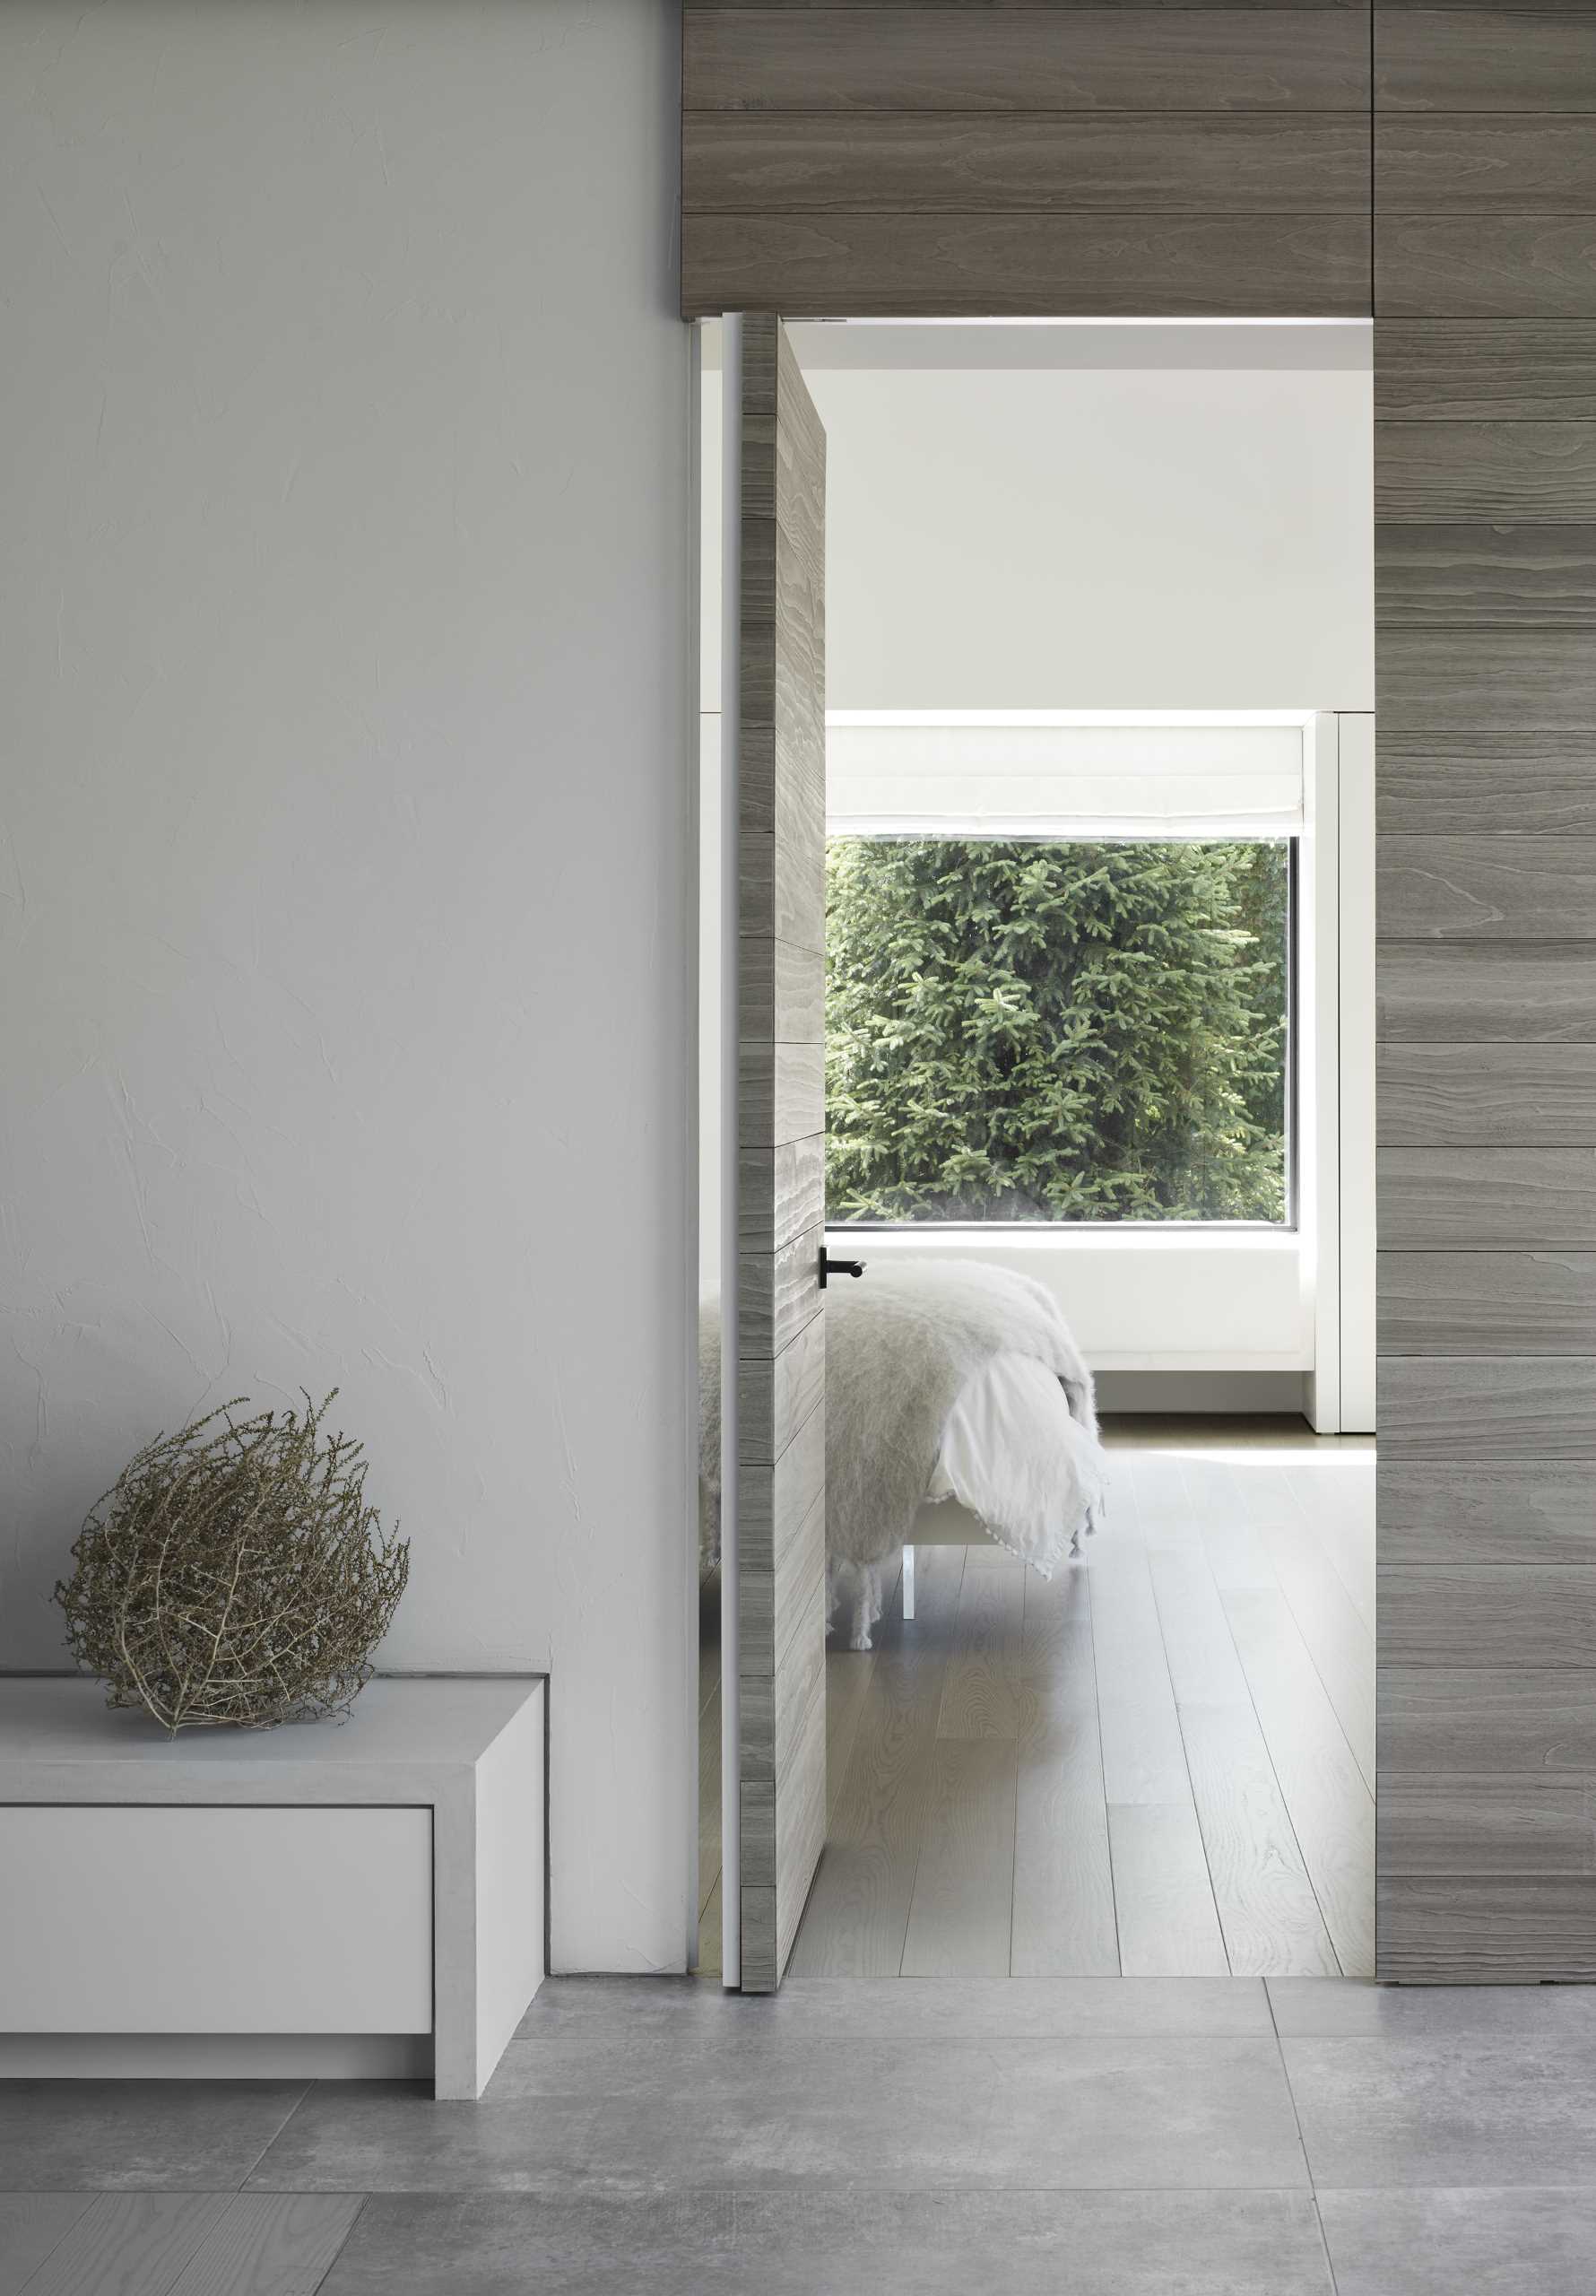 A door that blends into the wood wall, opens to reveal one of the bedrooms.